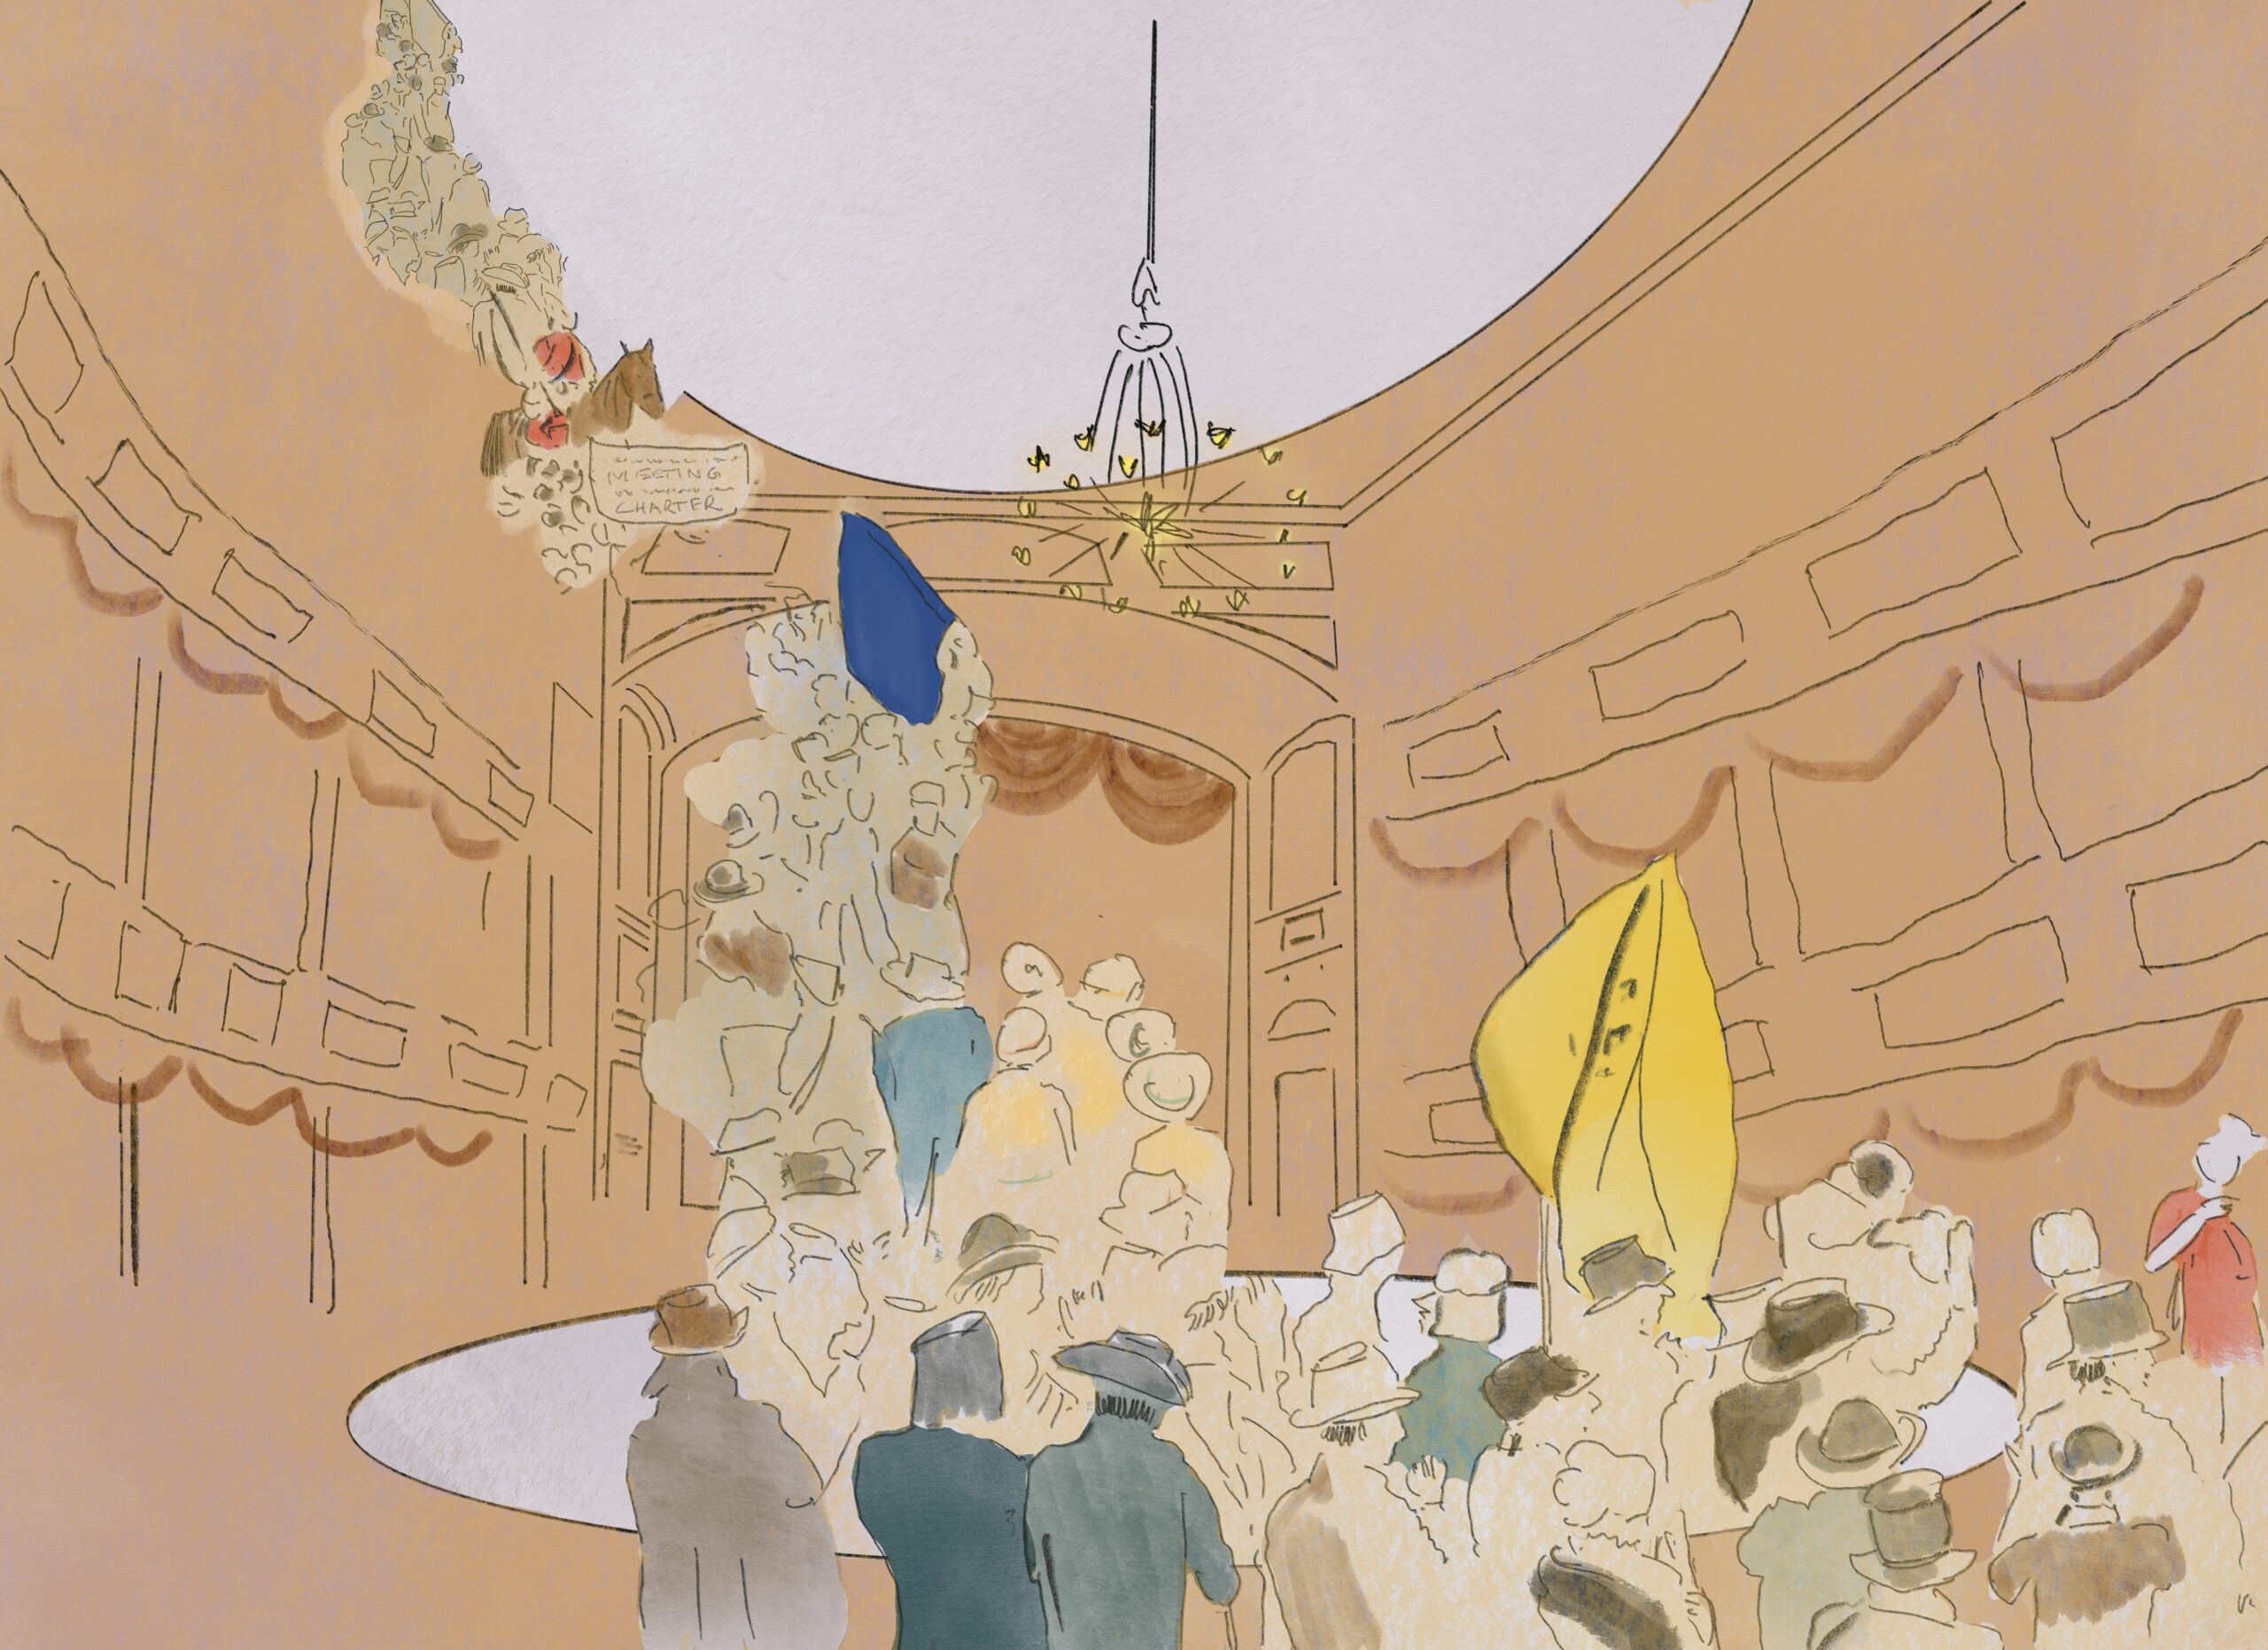 Ink drawing of a crowd of people in hats and coats with banners inside a great hall. The scene has a dreamlike quality, the people float, disconnected from surroundings, there is a horse in the upper right hand corner bearing a placard saying something about a charter and a chandelier hanging from the ceiling.